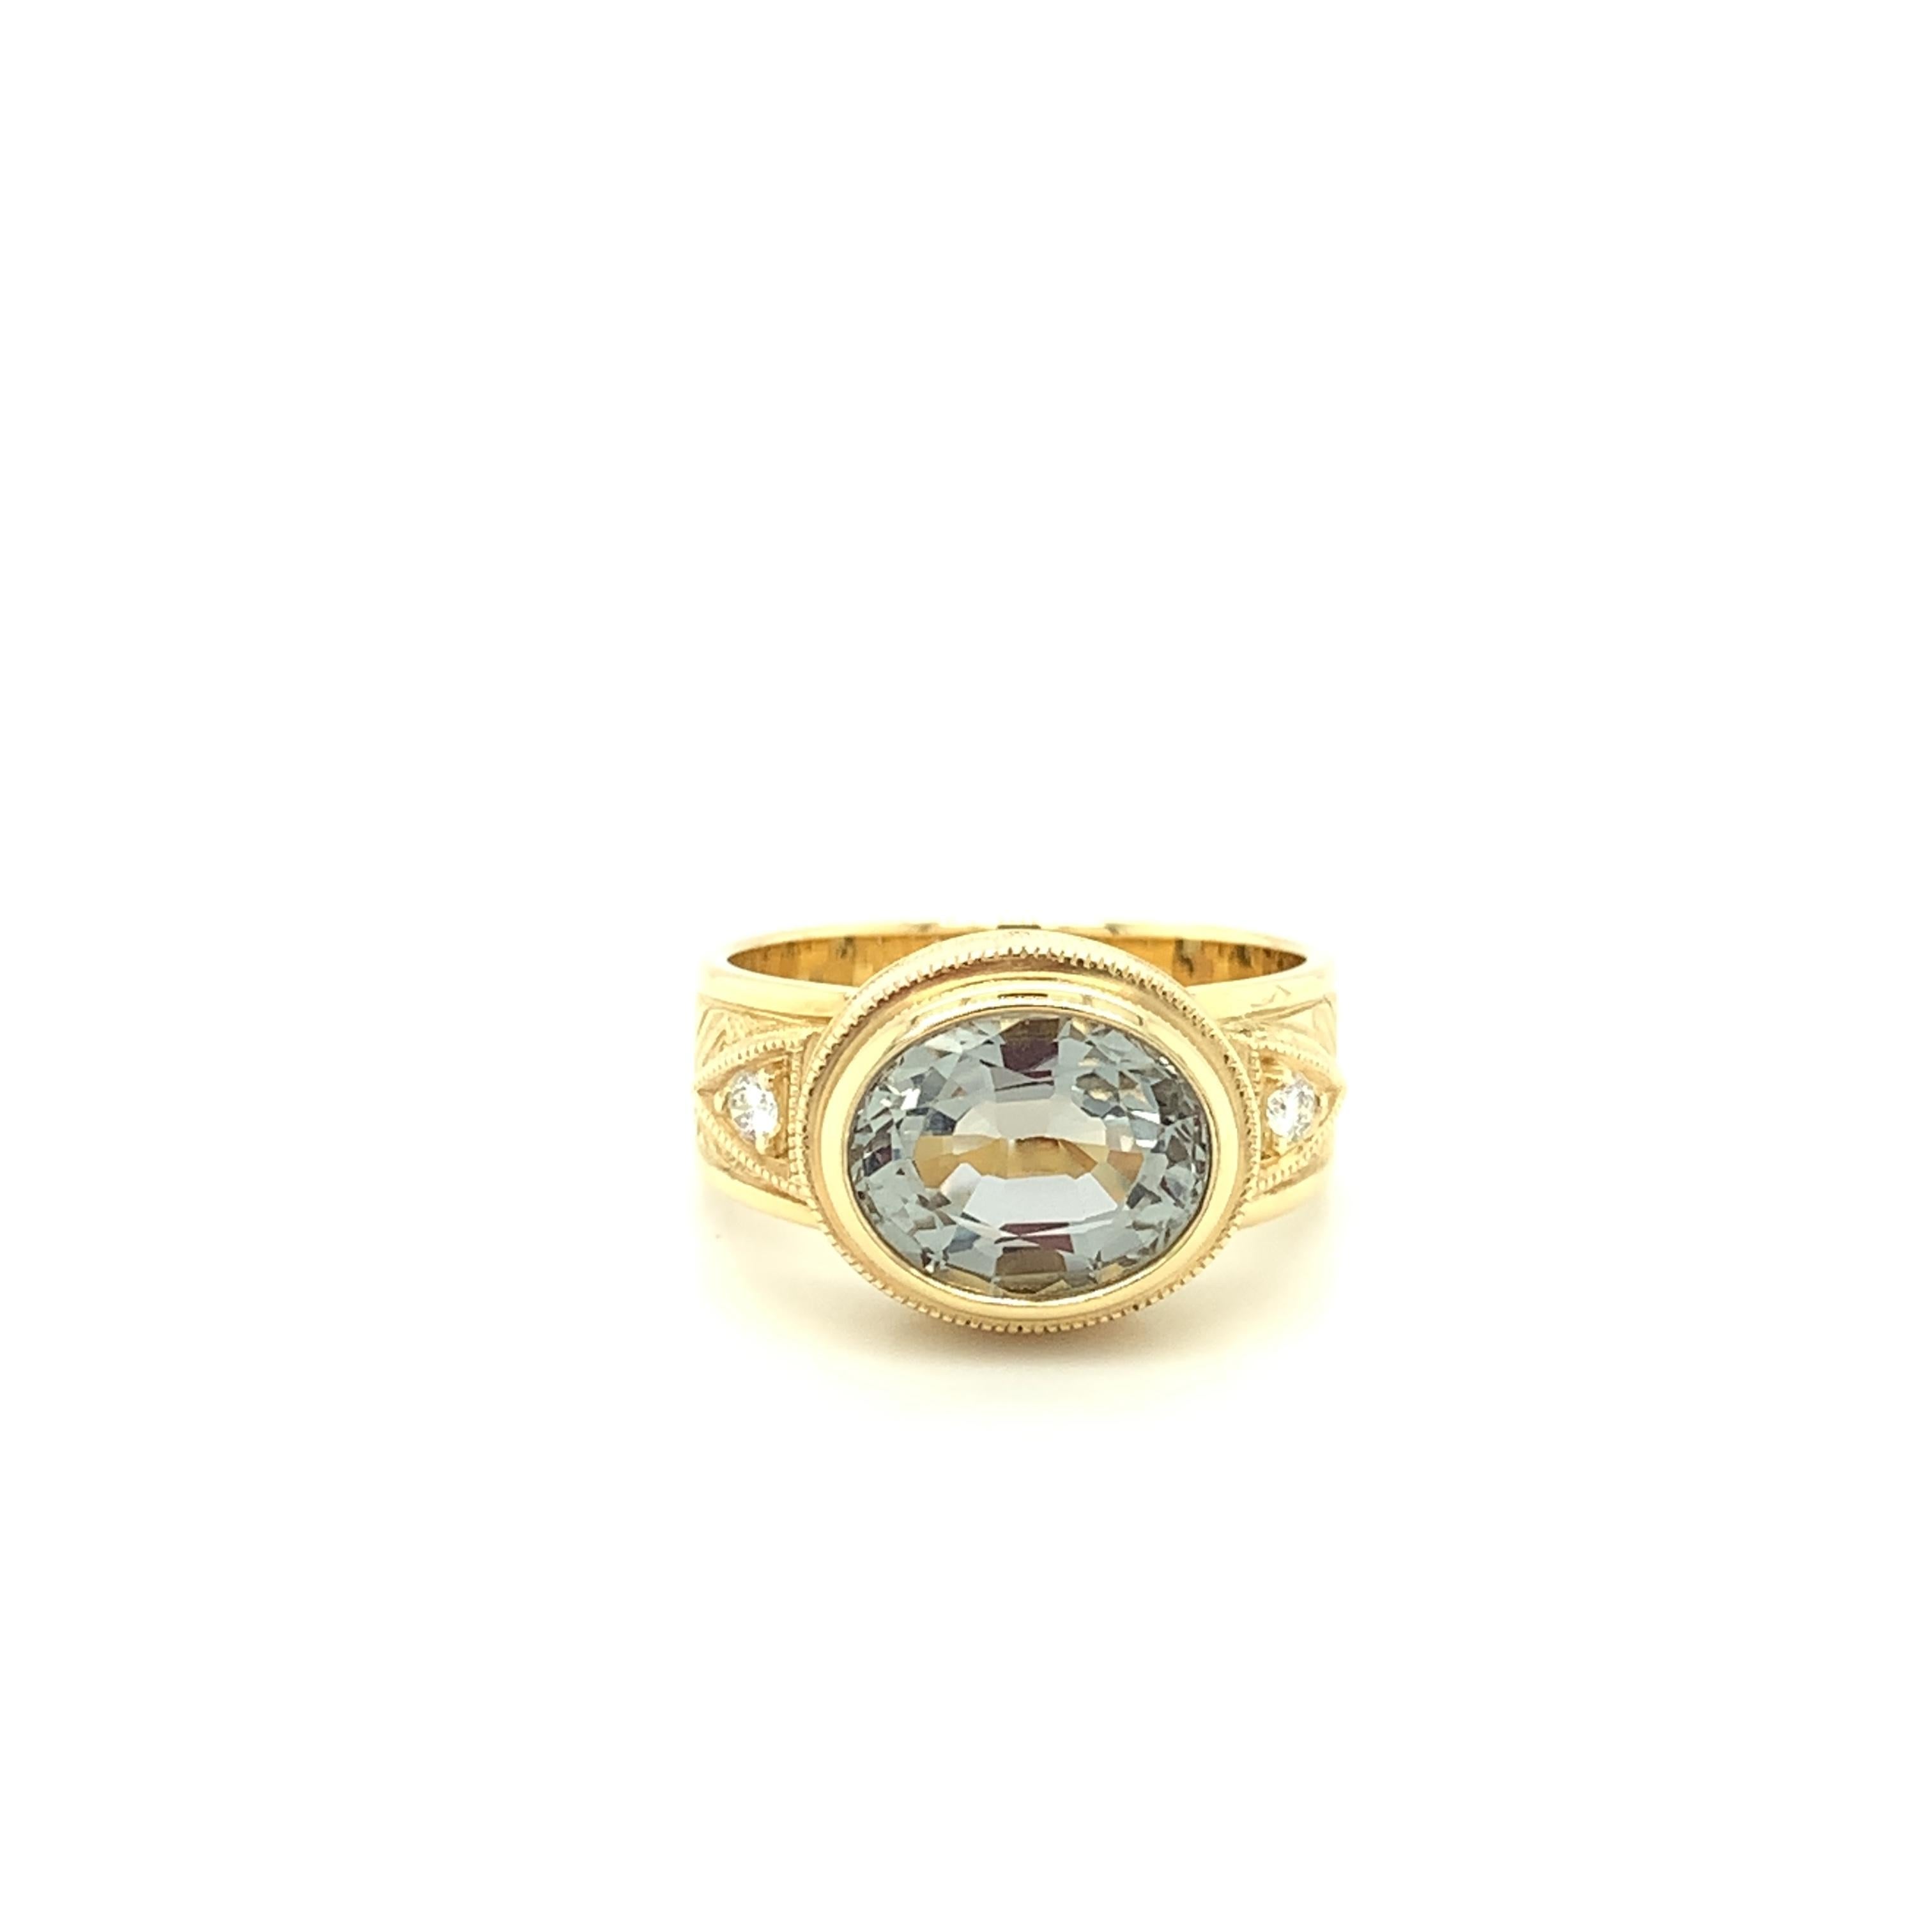 This handmade 18k yellow gold ring features a crystalline silver gray topaz oval that has been set 